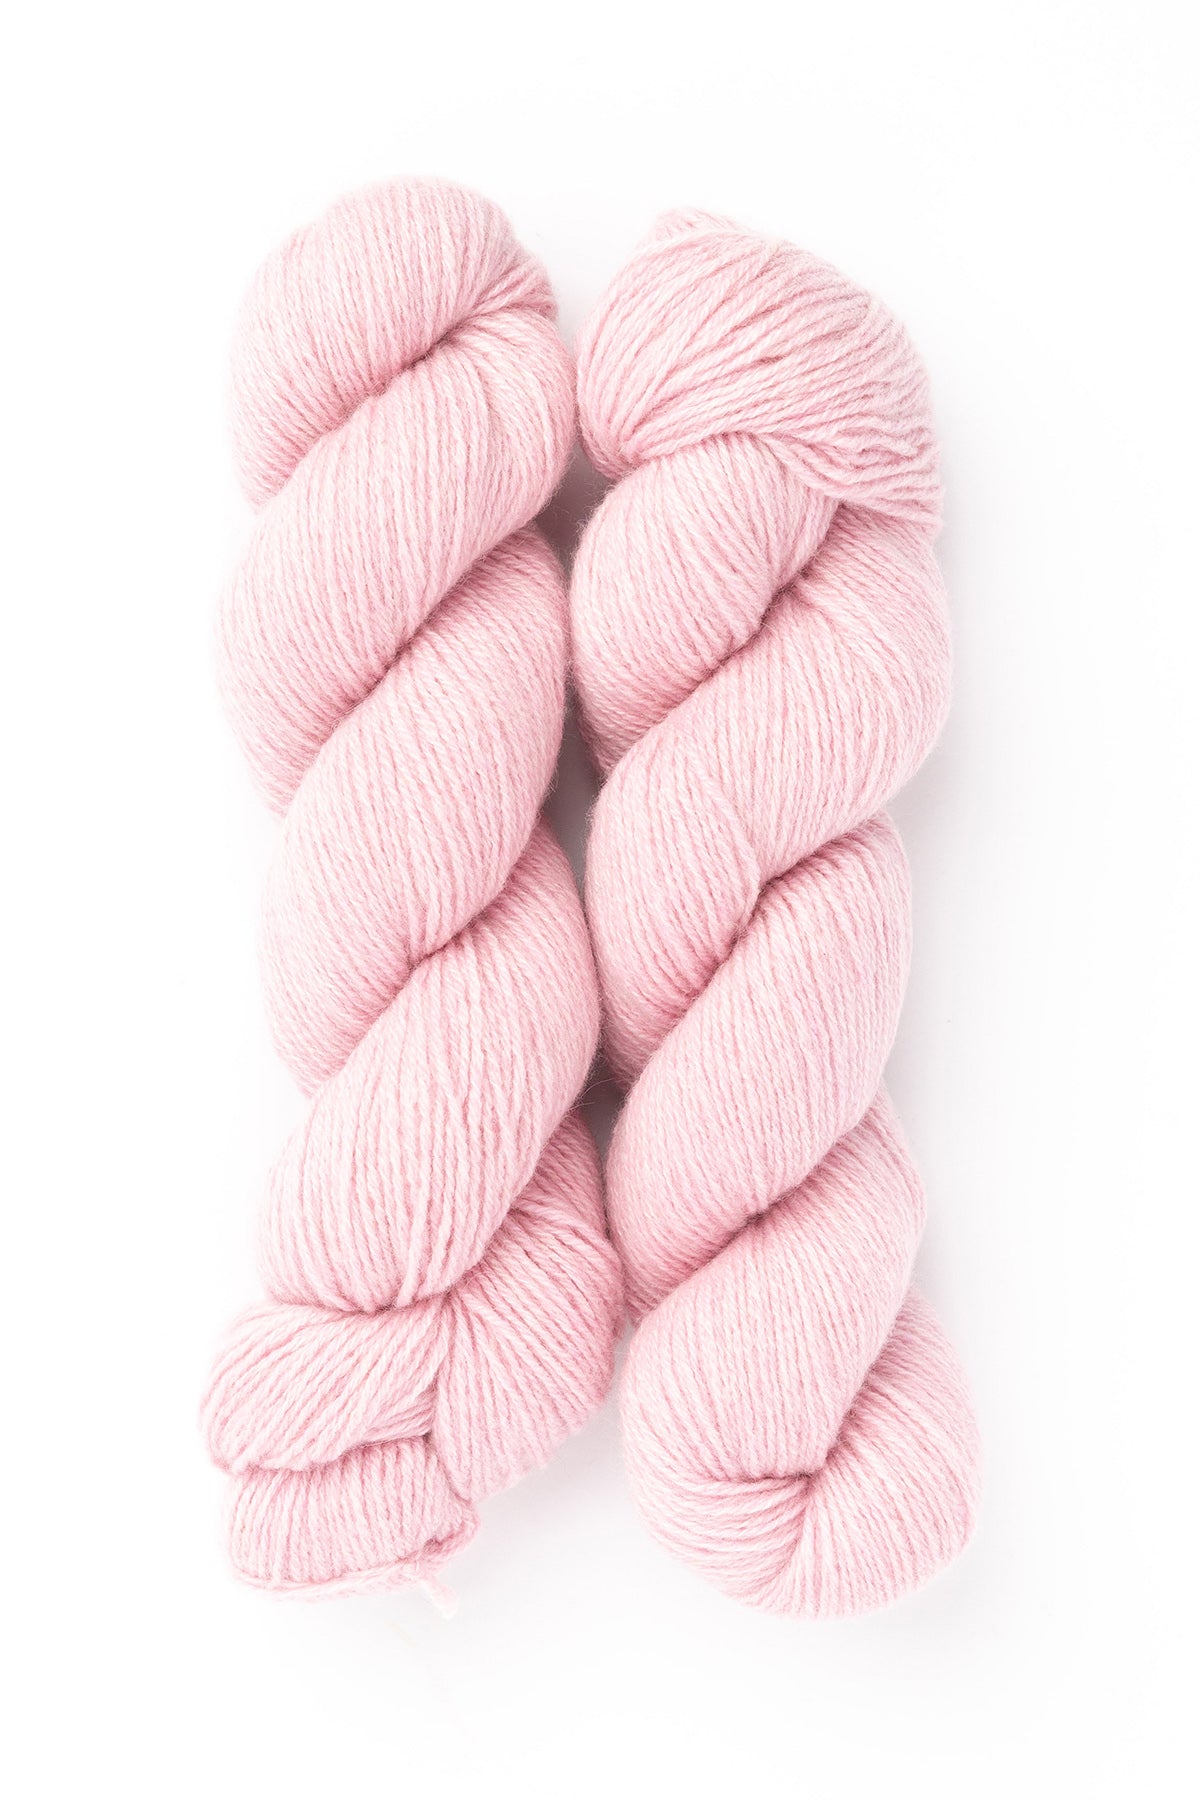 Recycled Yarn - Wool Blend - Lace Weight - Heathered Light Pink - 1200 yards